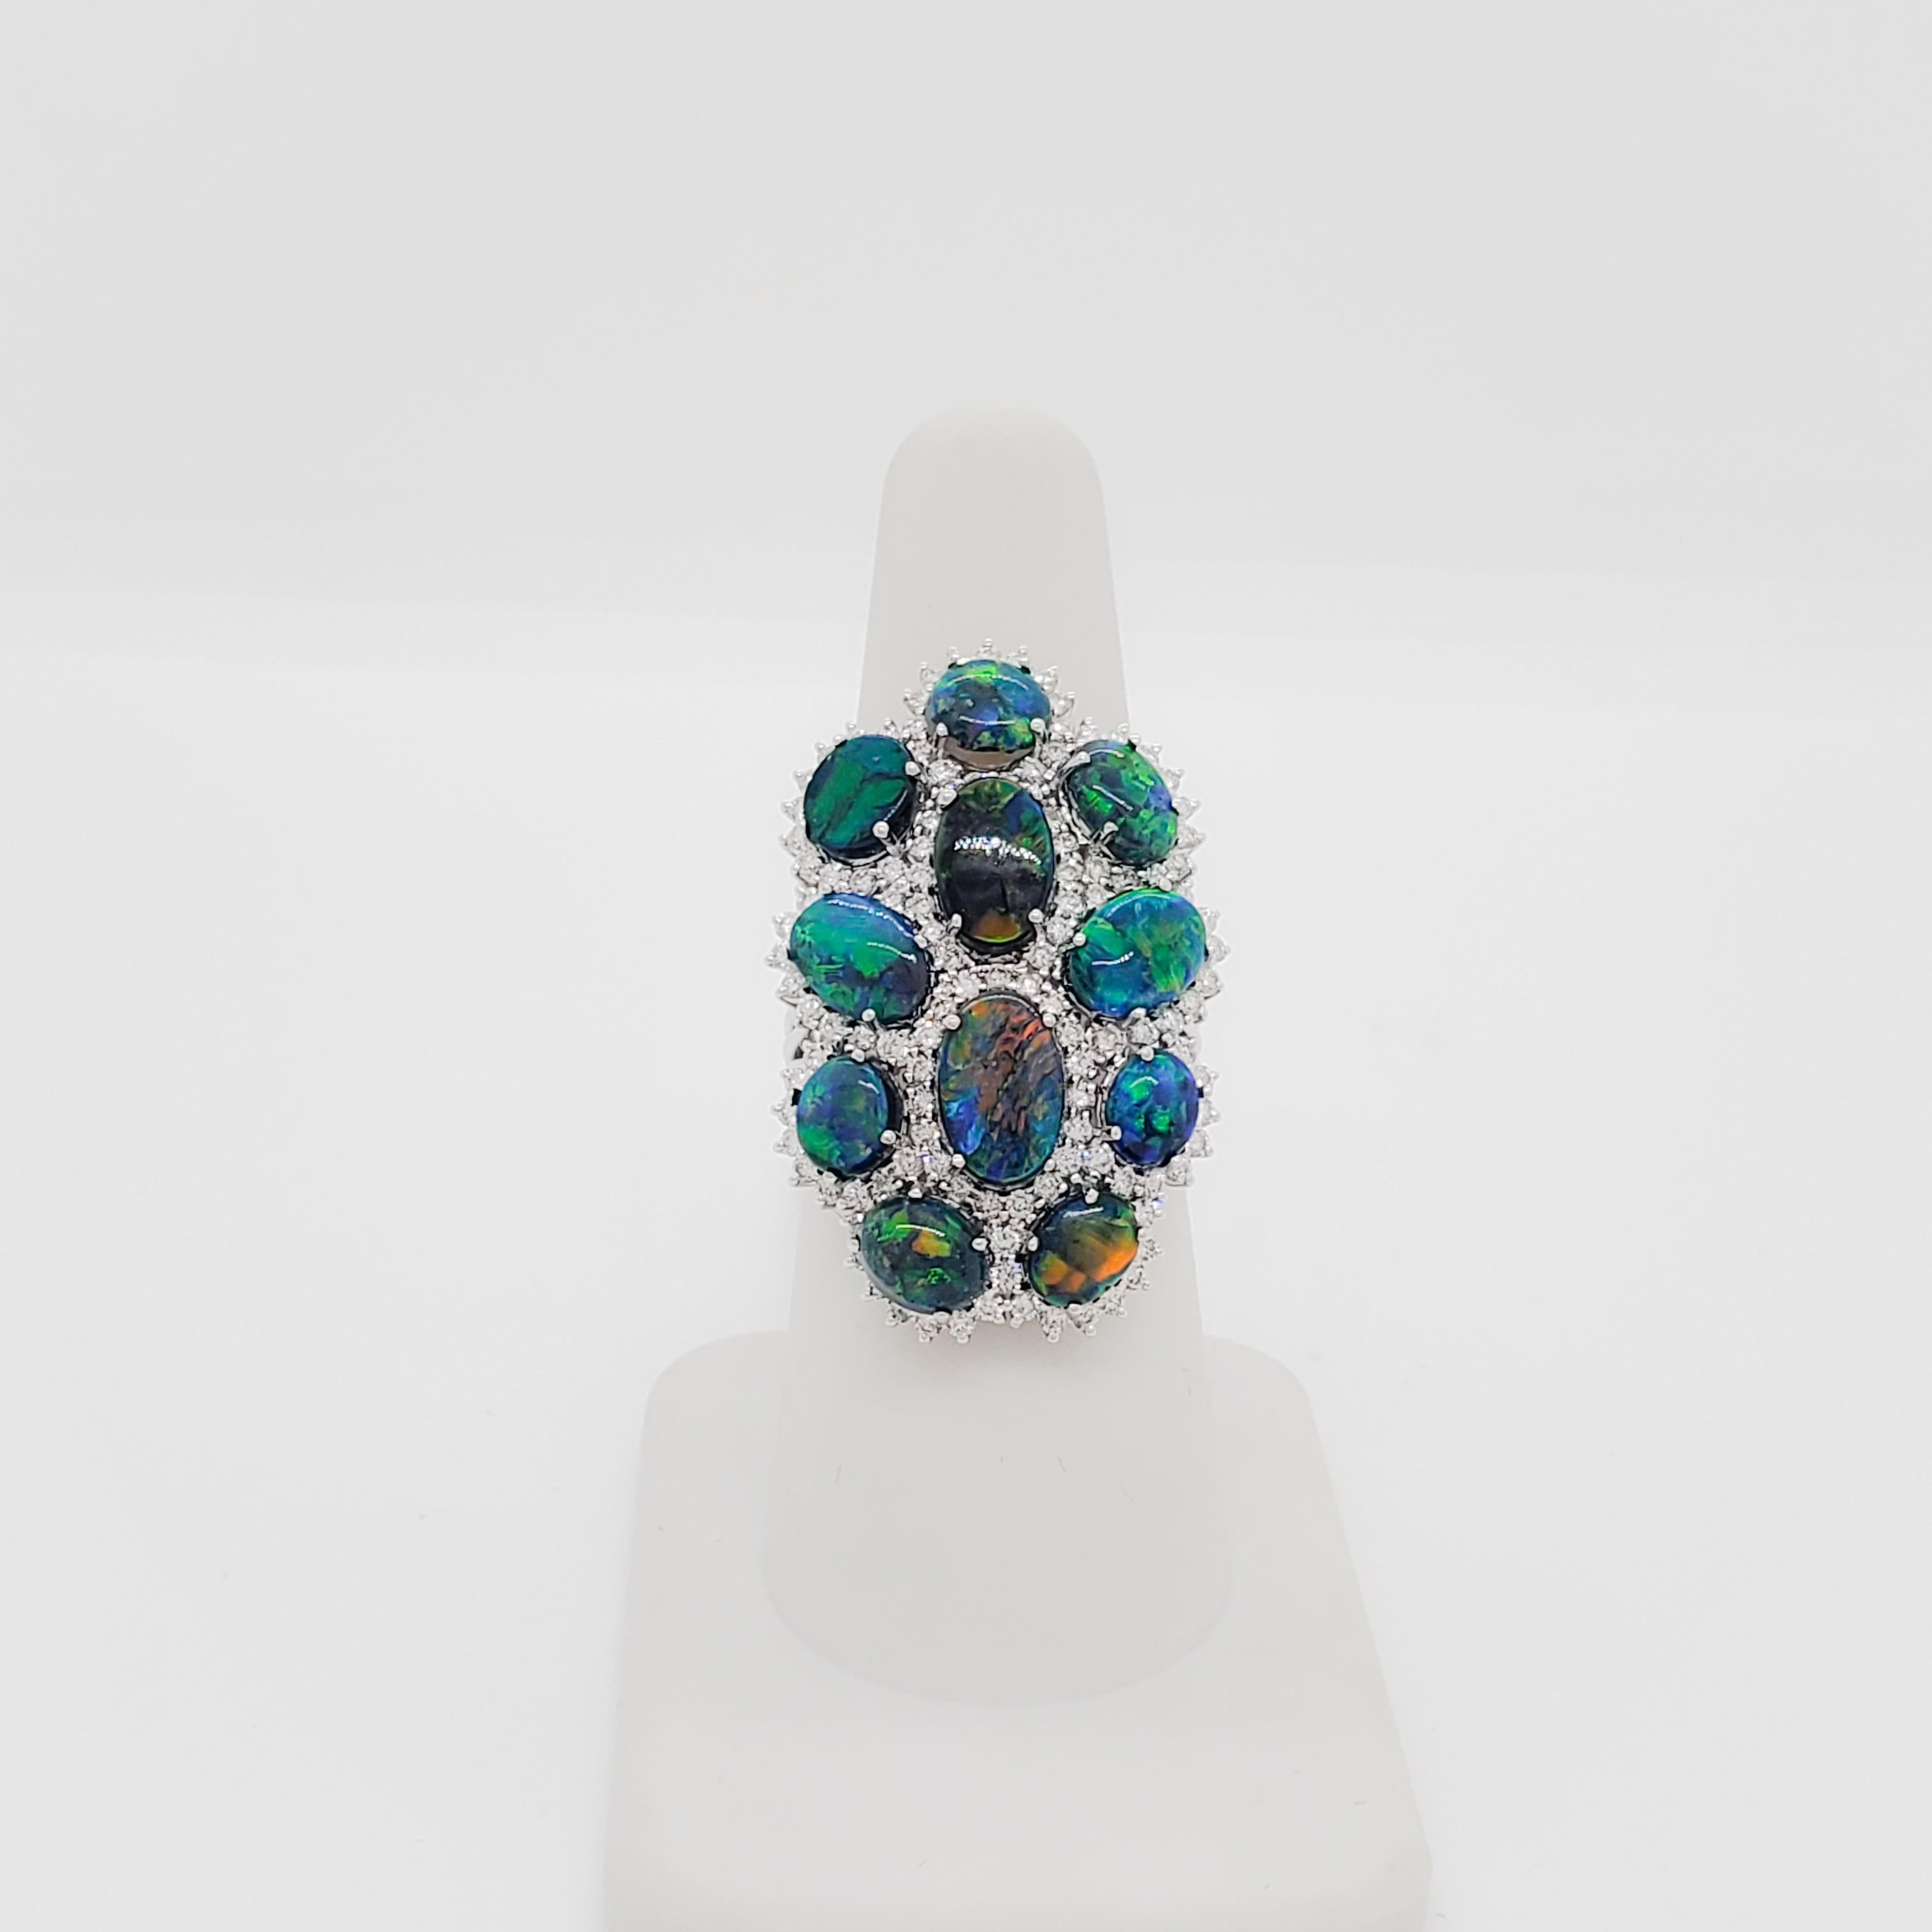  Black Opal and Diamond Cluster Ring in 18k White Gold In Excellent Condition For Sale In Los Angeles, CA